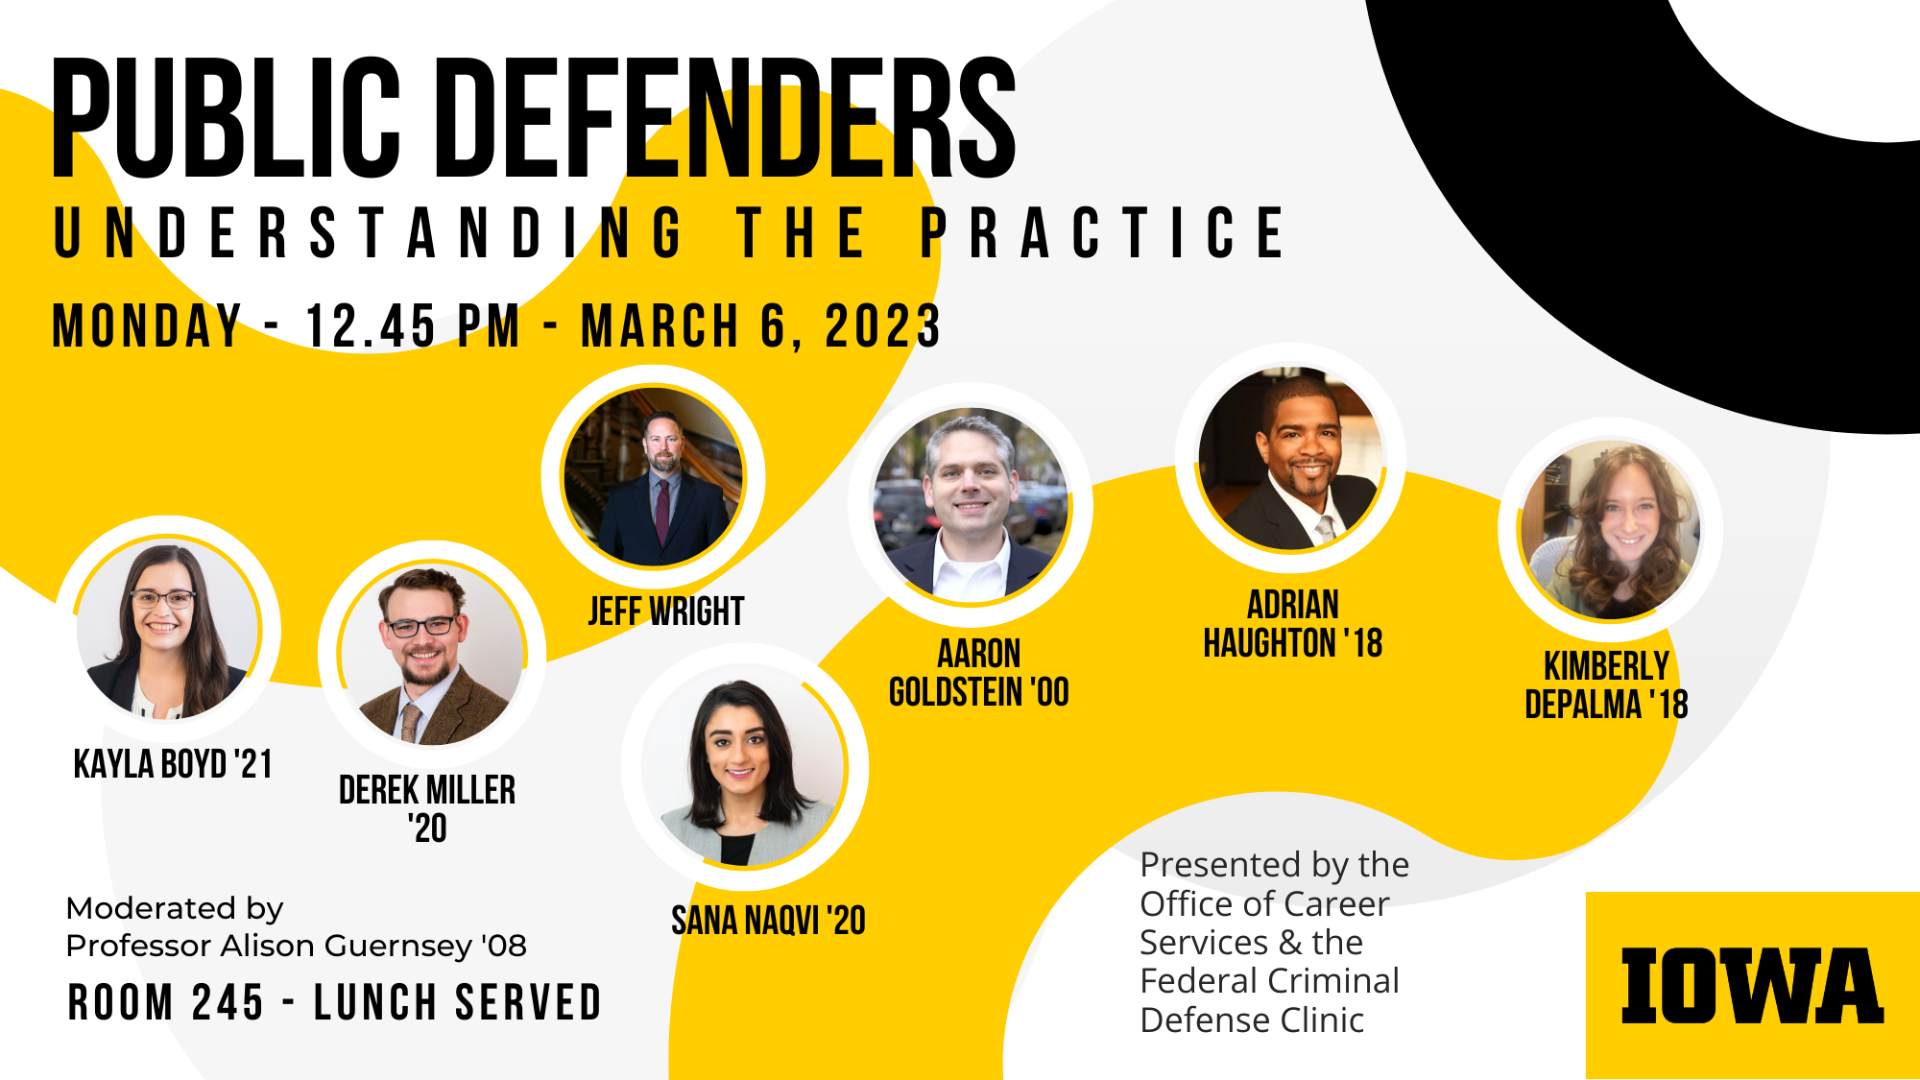 Public Defenders    Understanding the Practice    Monday - 12:45 pm - March 6, 2023        Kayla Boyd '21    Derek Miller '20    Jeff Wright    Sana Naqvi '20    Aaron Goldstein '00    Adrian Haughton "18    Kimberly DePalma '18    Moderated by Professor Alison Guernsey '08    Room 245 - Lunch Served        Presented by the Office of Career Services & the Federal Criminal Defense Clinic        Iowa logo